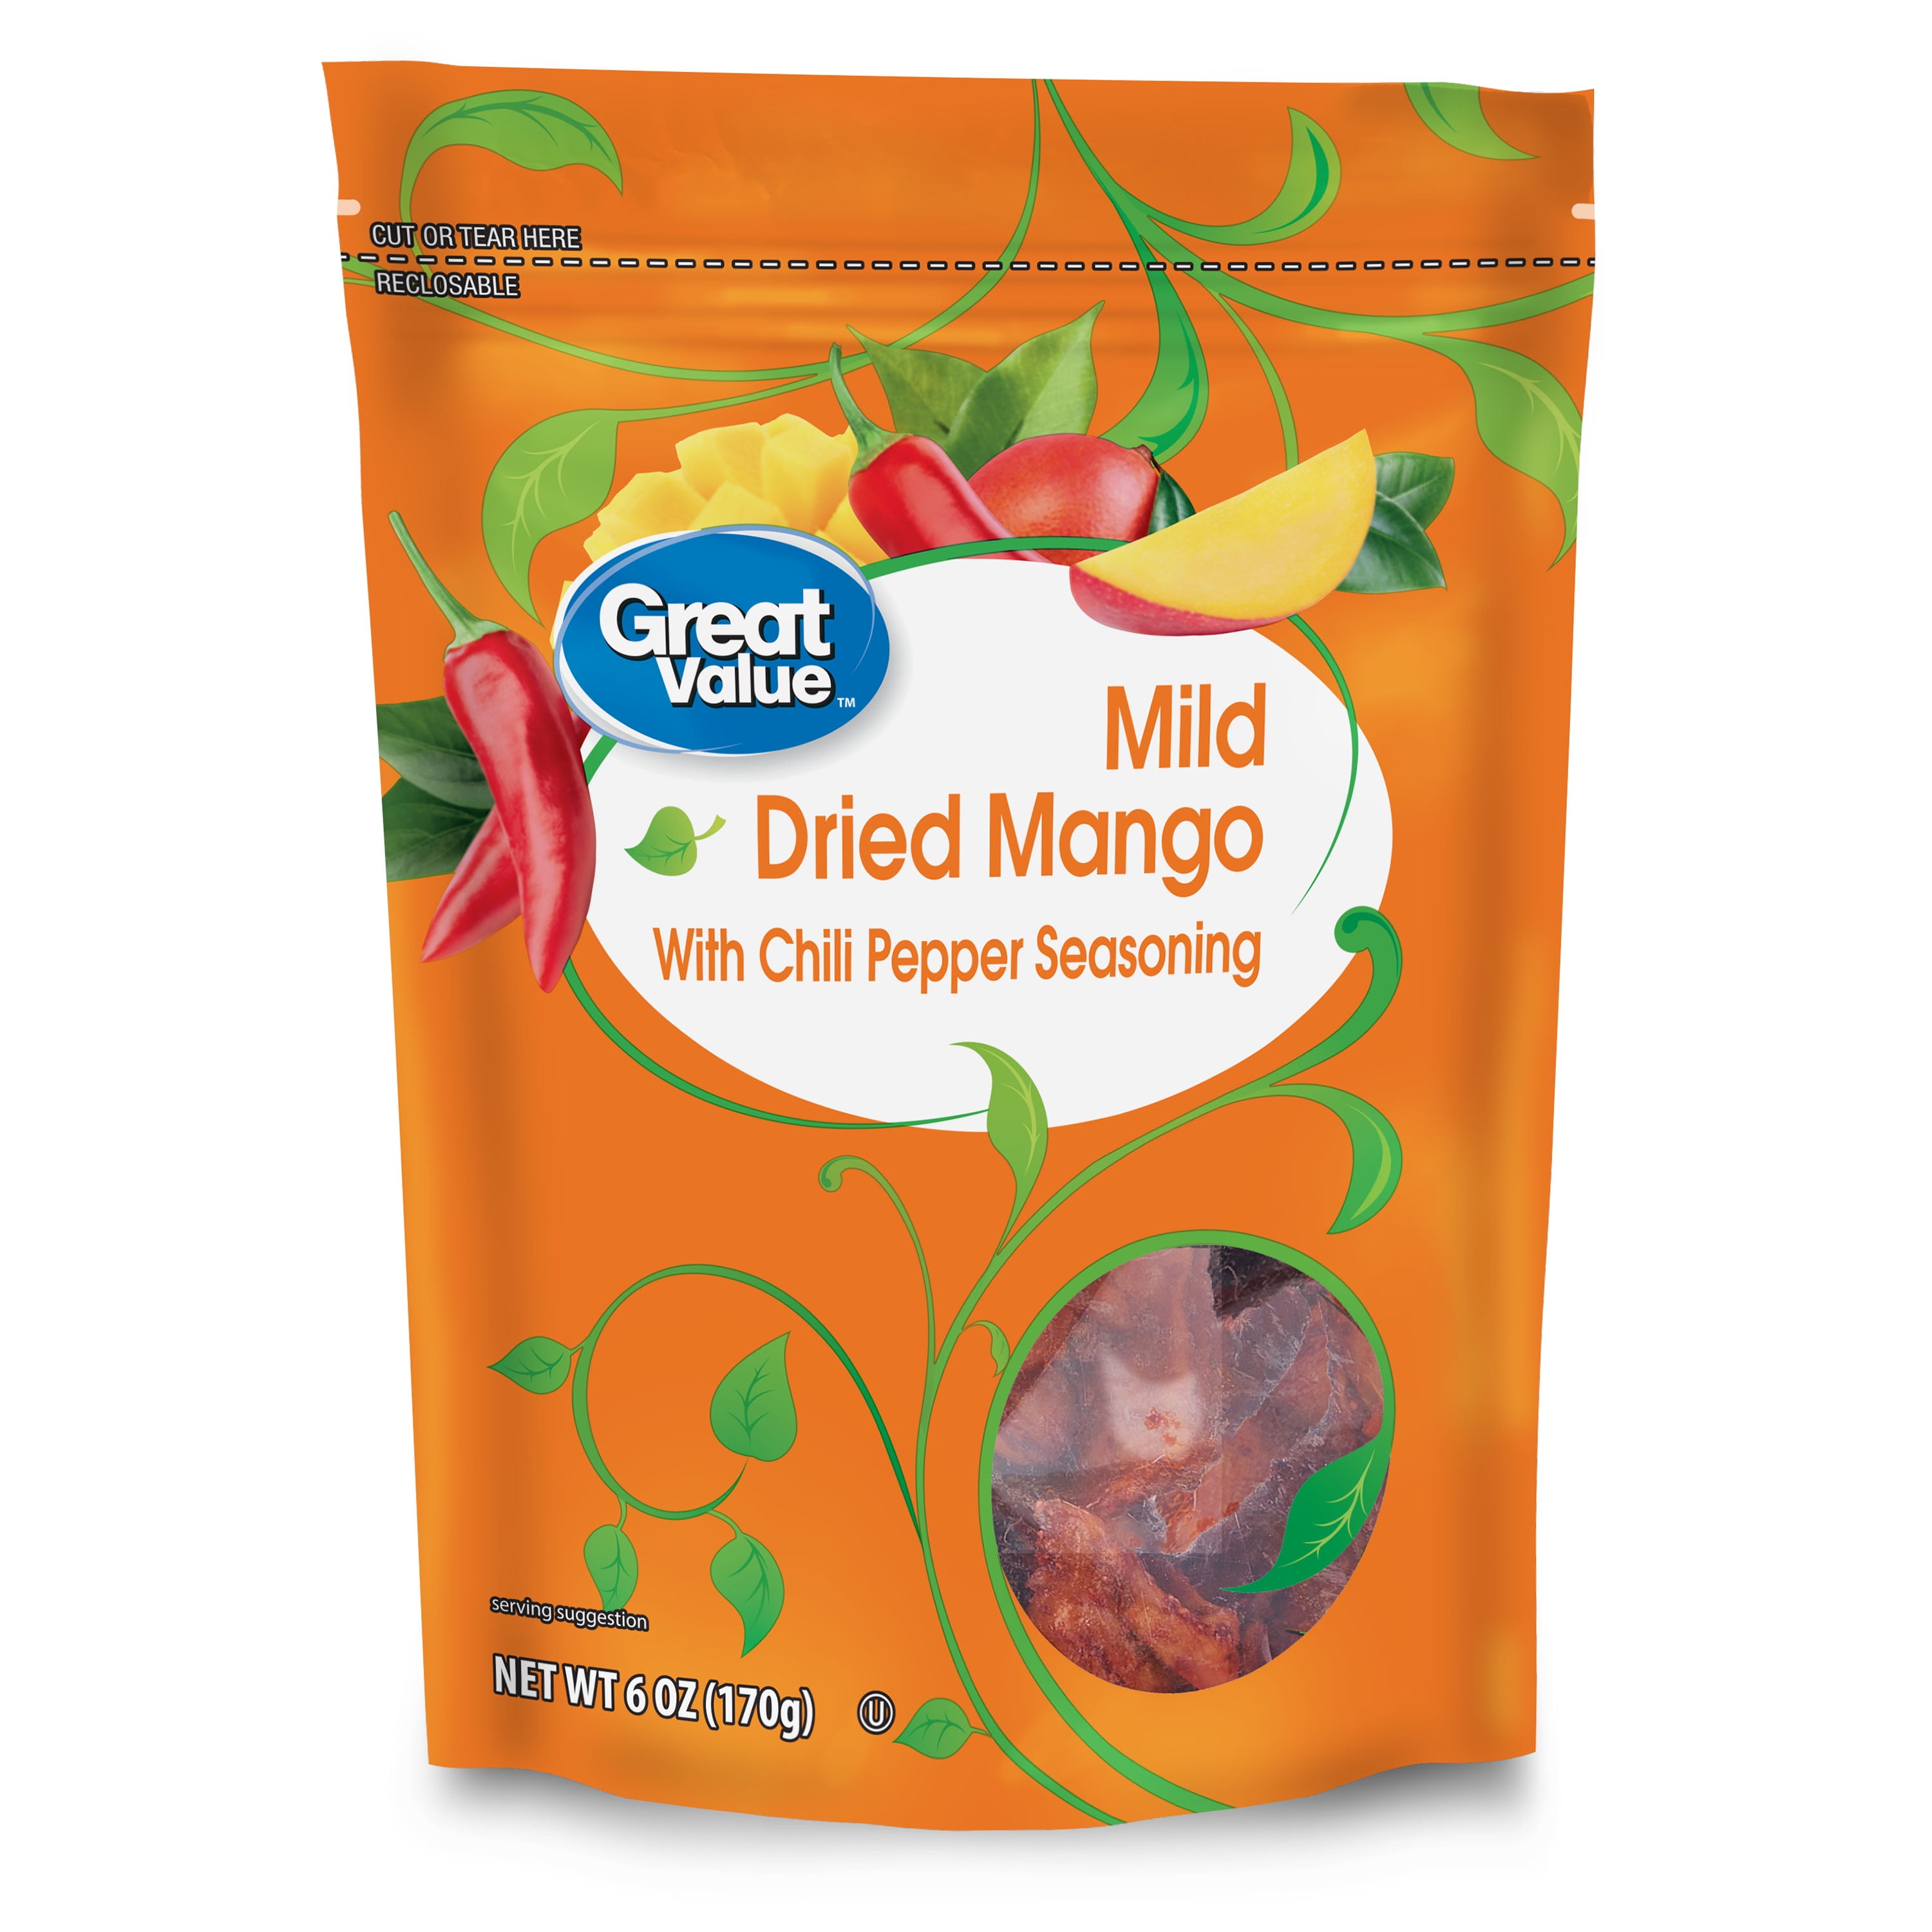 Great Value Mild Dried Mango with Chili Pepper Seasoning, 6 oz